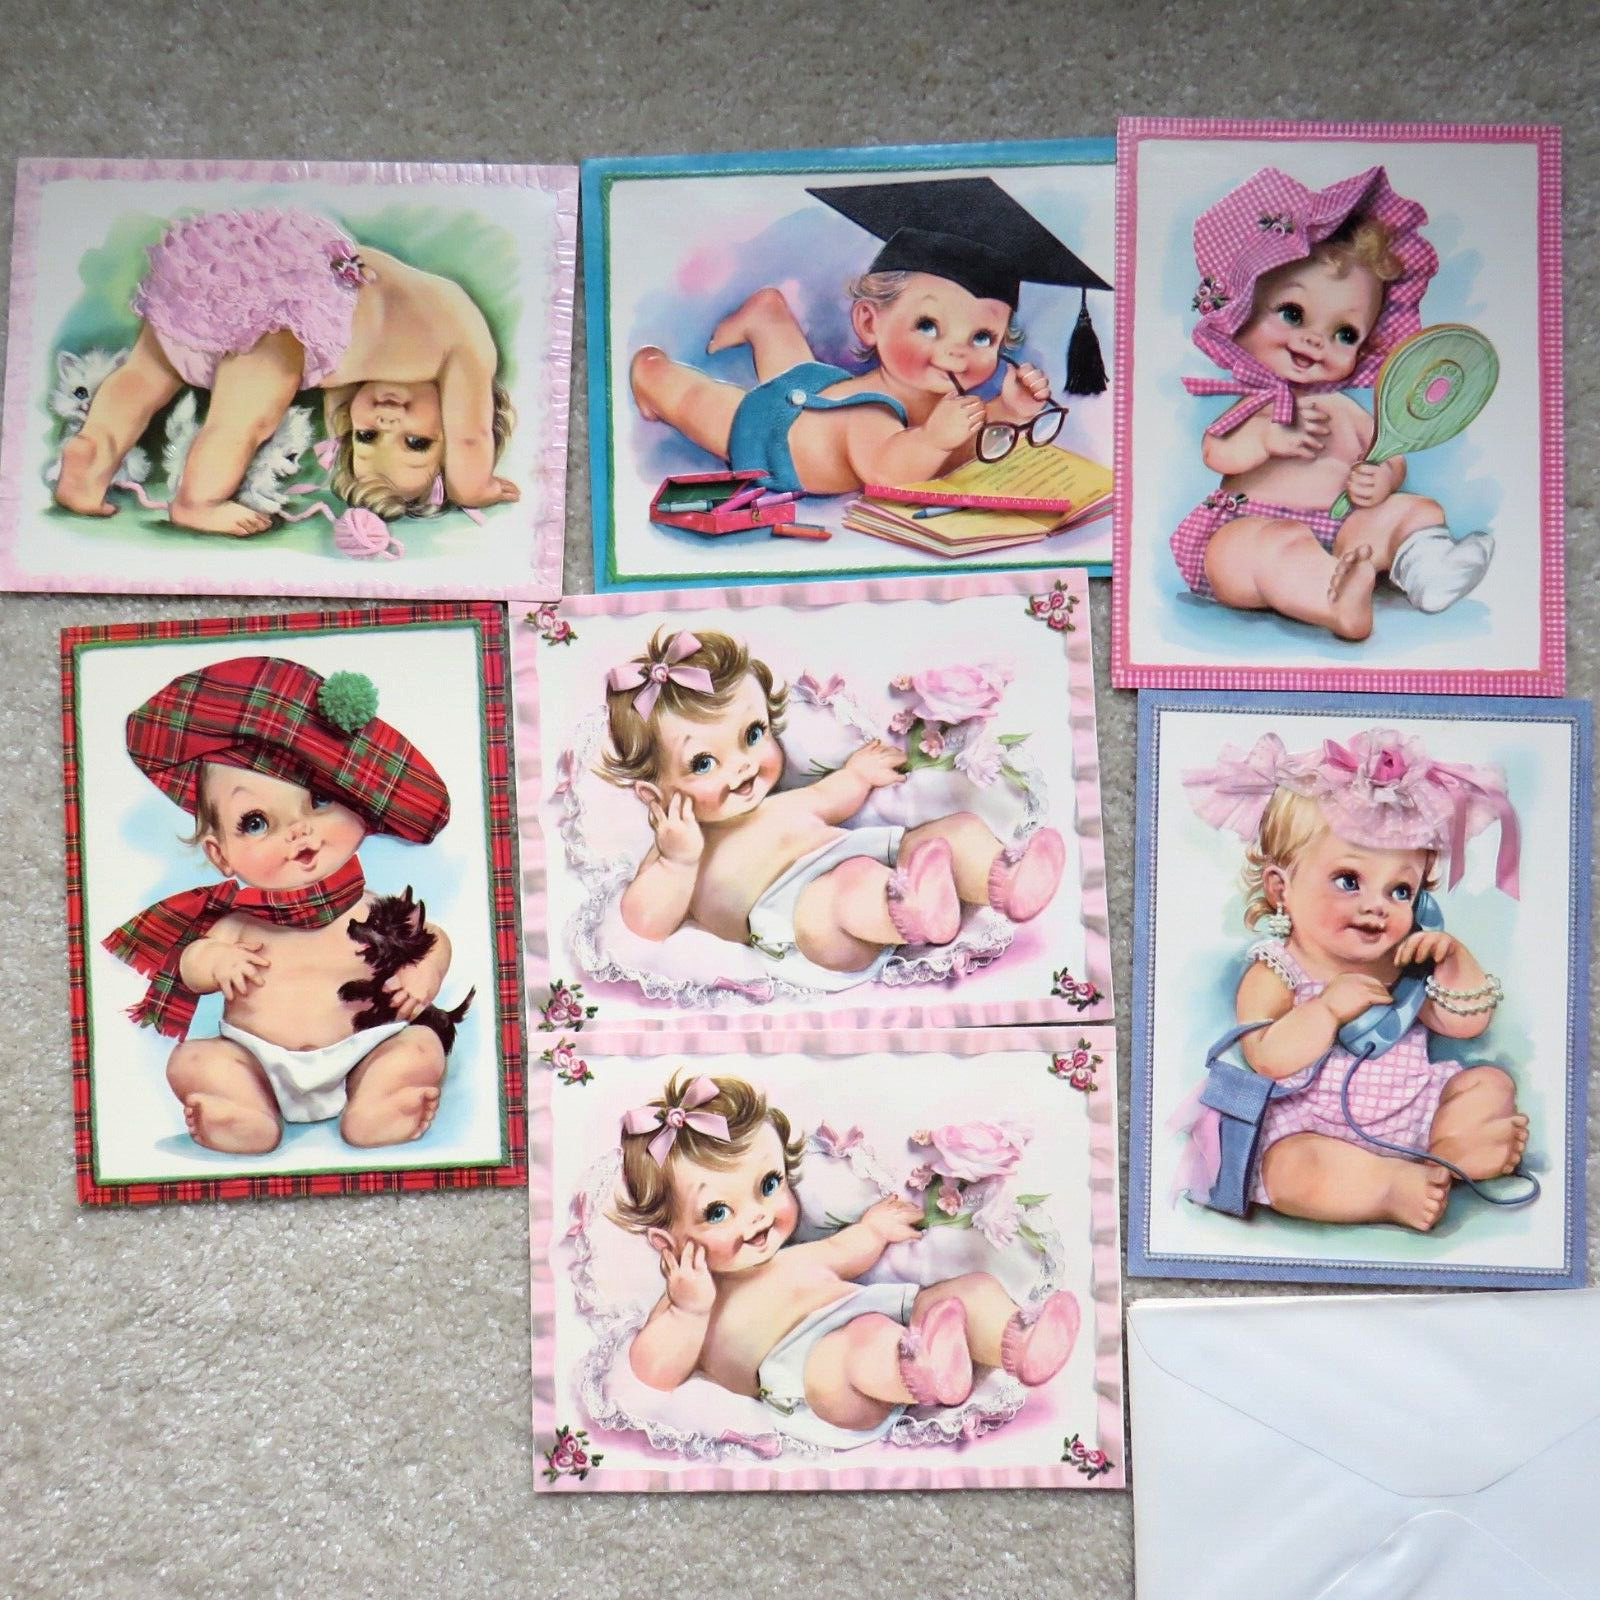 Vintage 7 Large Greetings Cards 1950 s Baby Poses Get Well Commencement &c Coby?